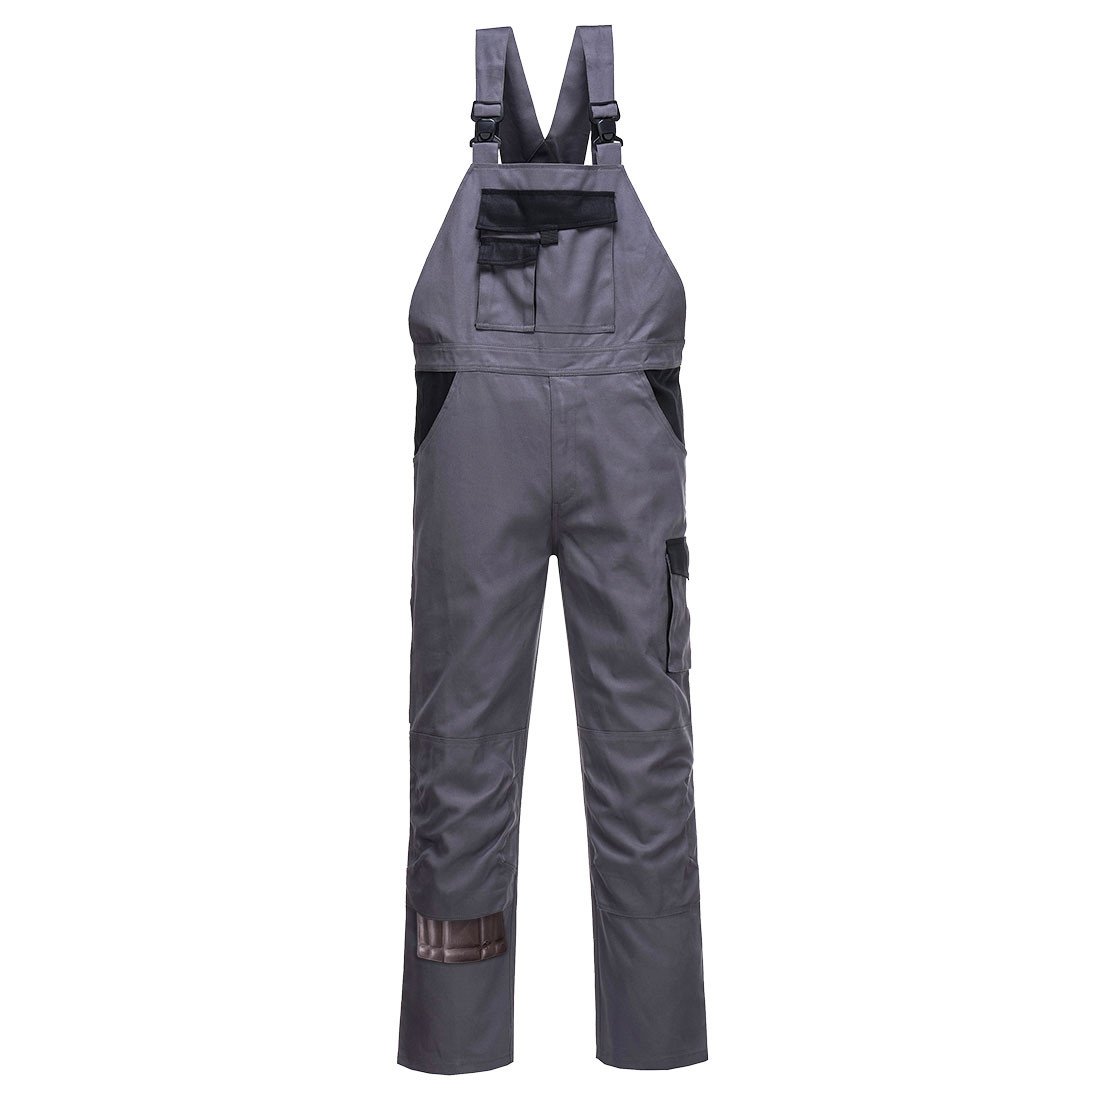 Womens Portwest Warsaw Bib and Brace Overall